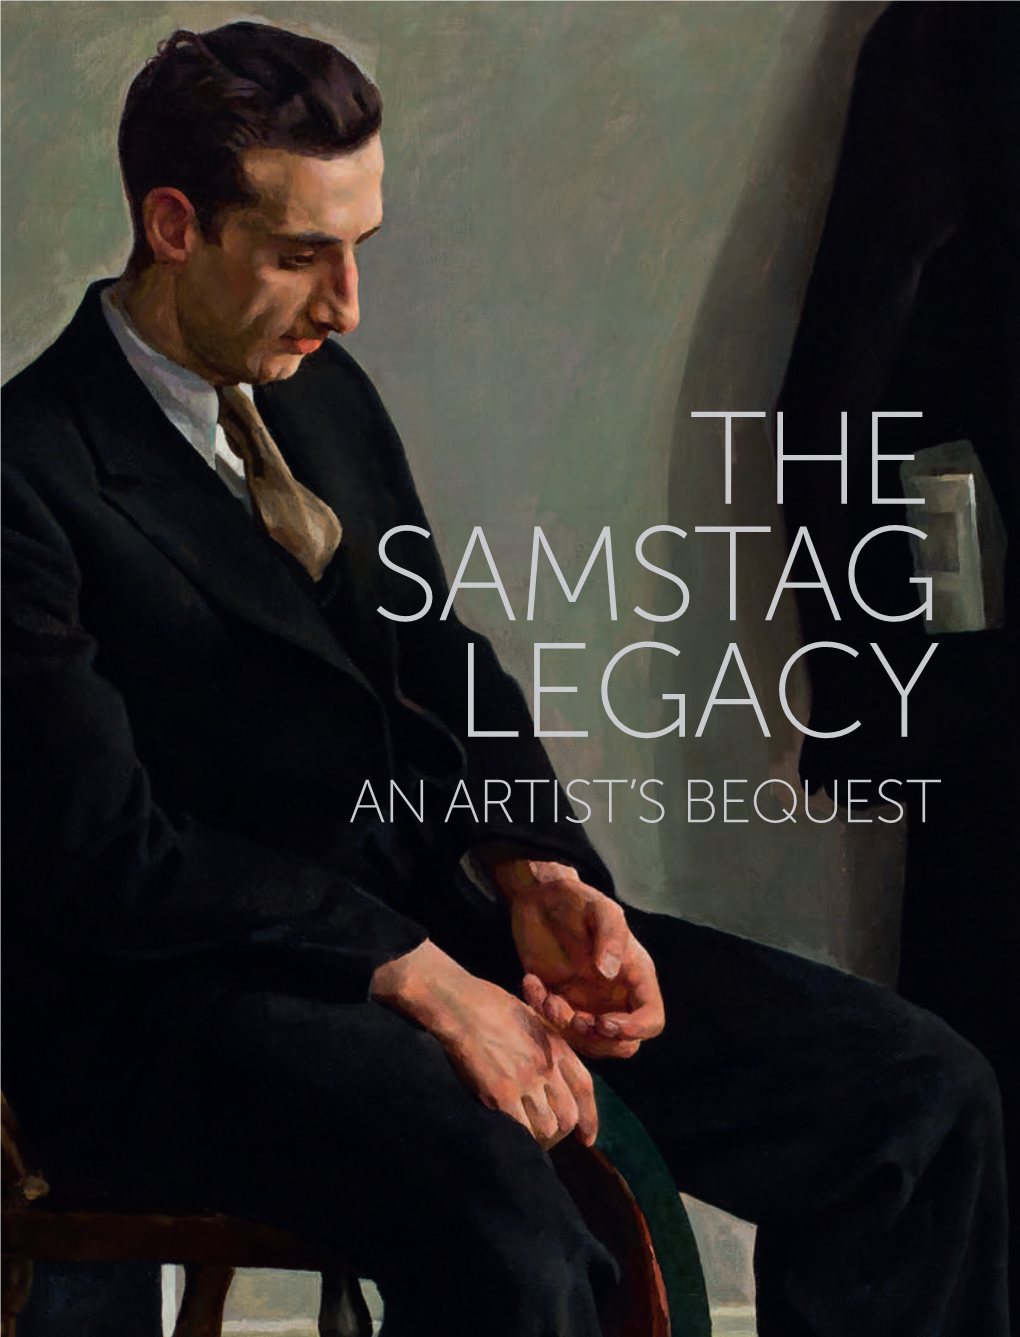 The Samstag Legacy: an Artist's Bequest